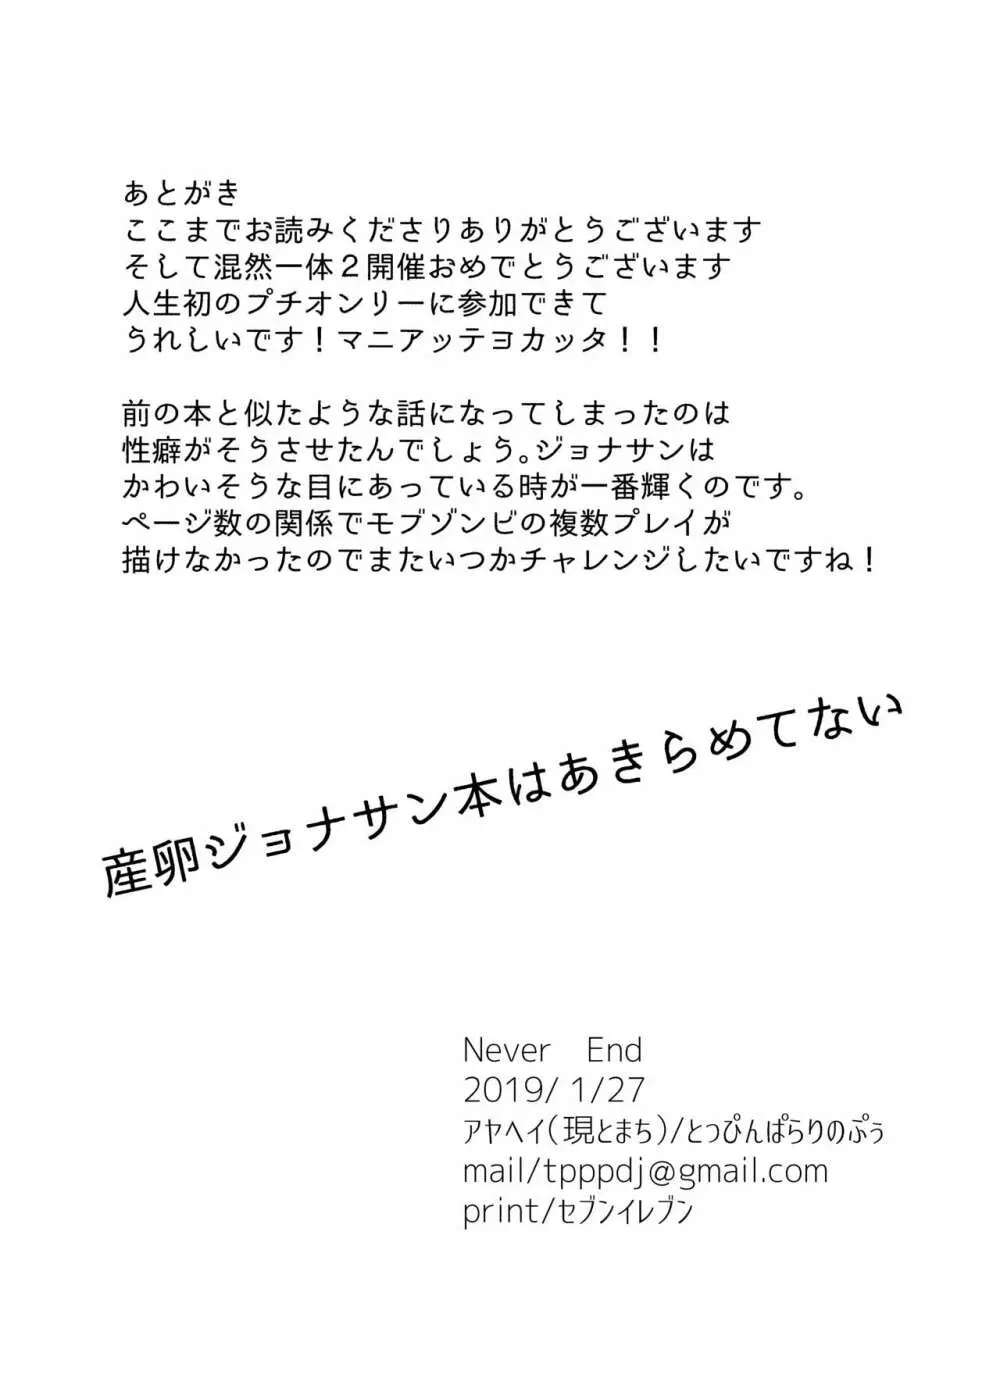 Never End 17ページ